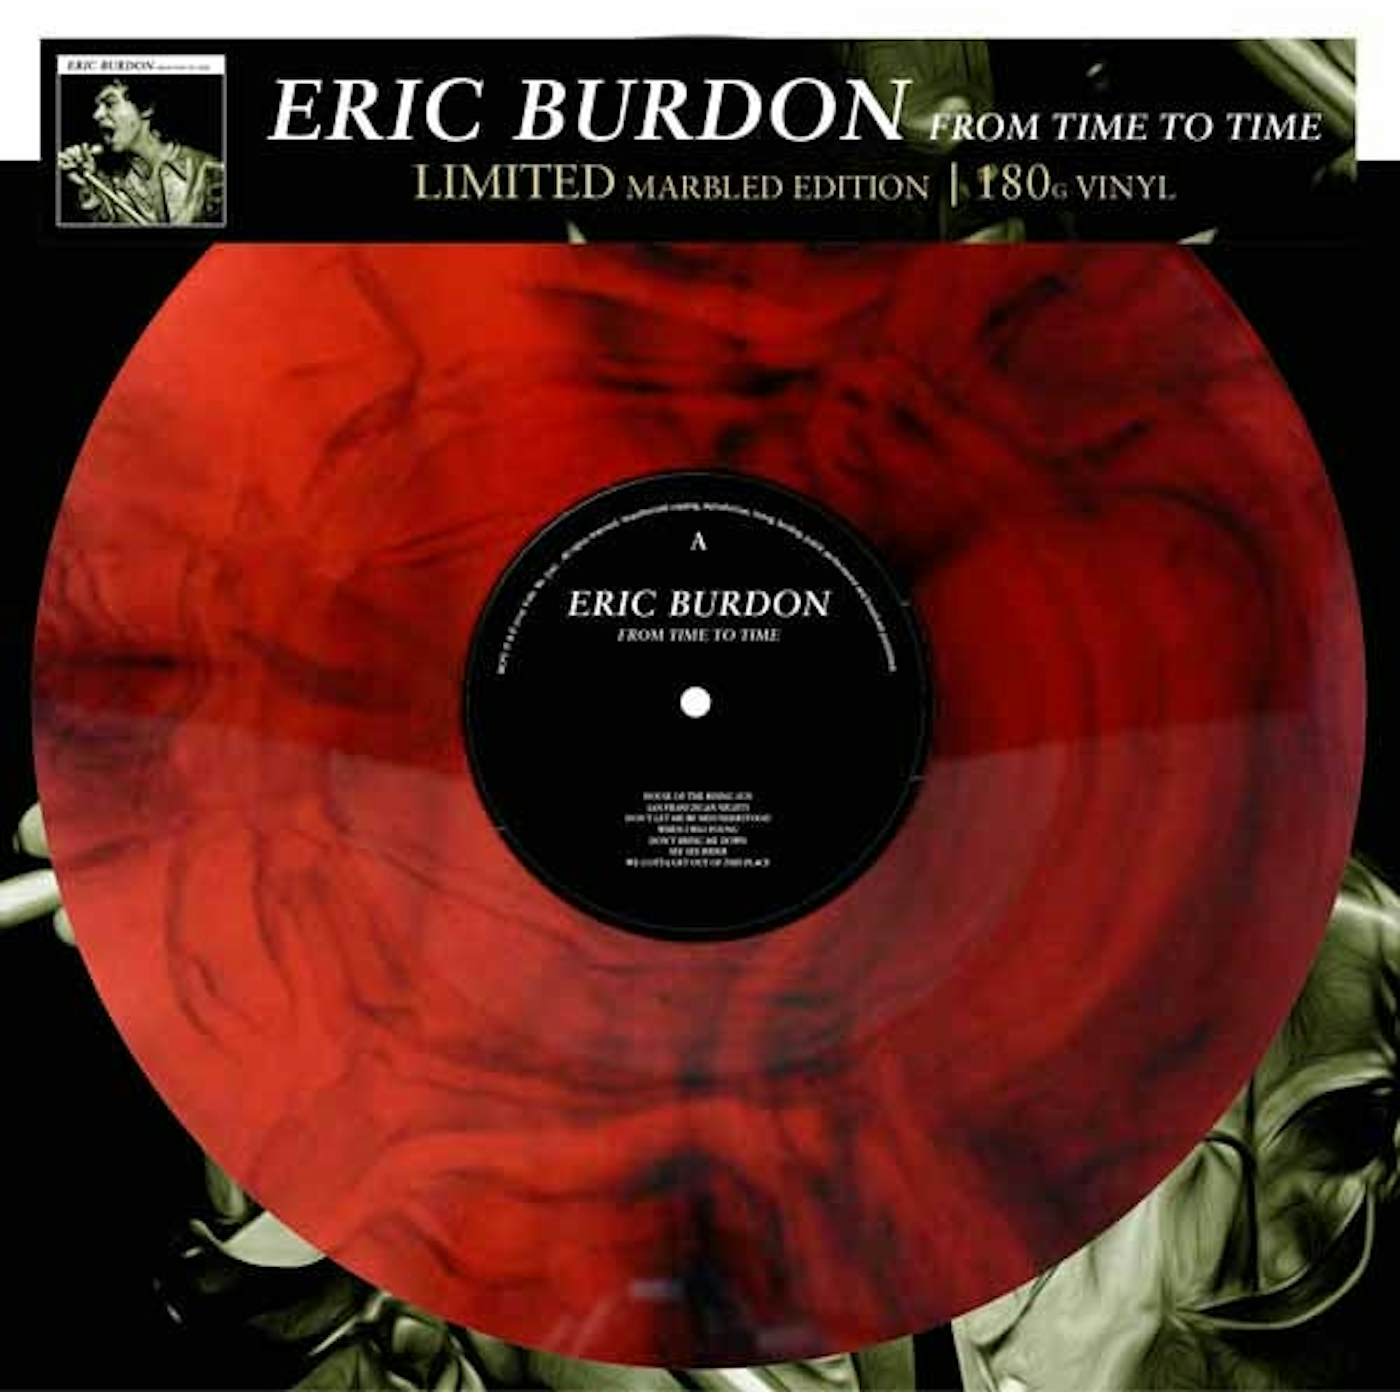 Eric Burdon LP - From Time To Time (Vinyl)